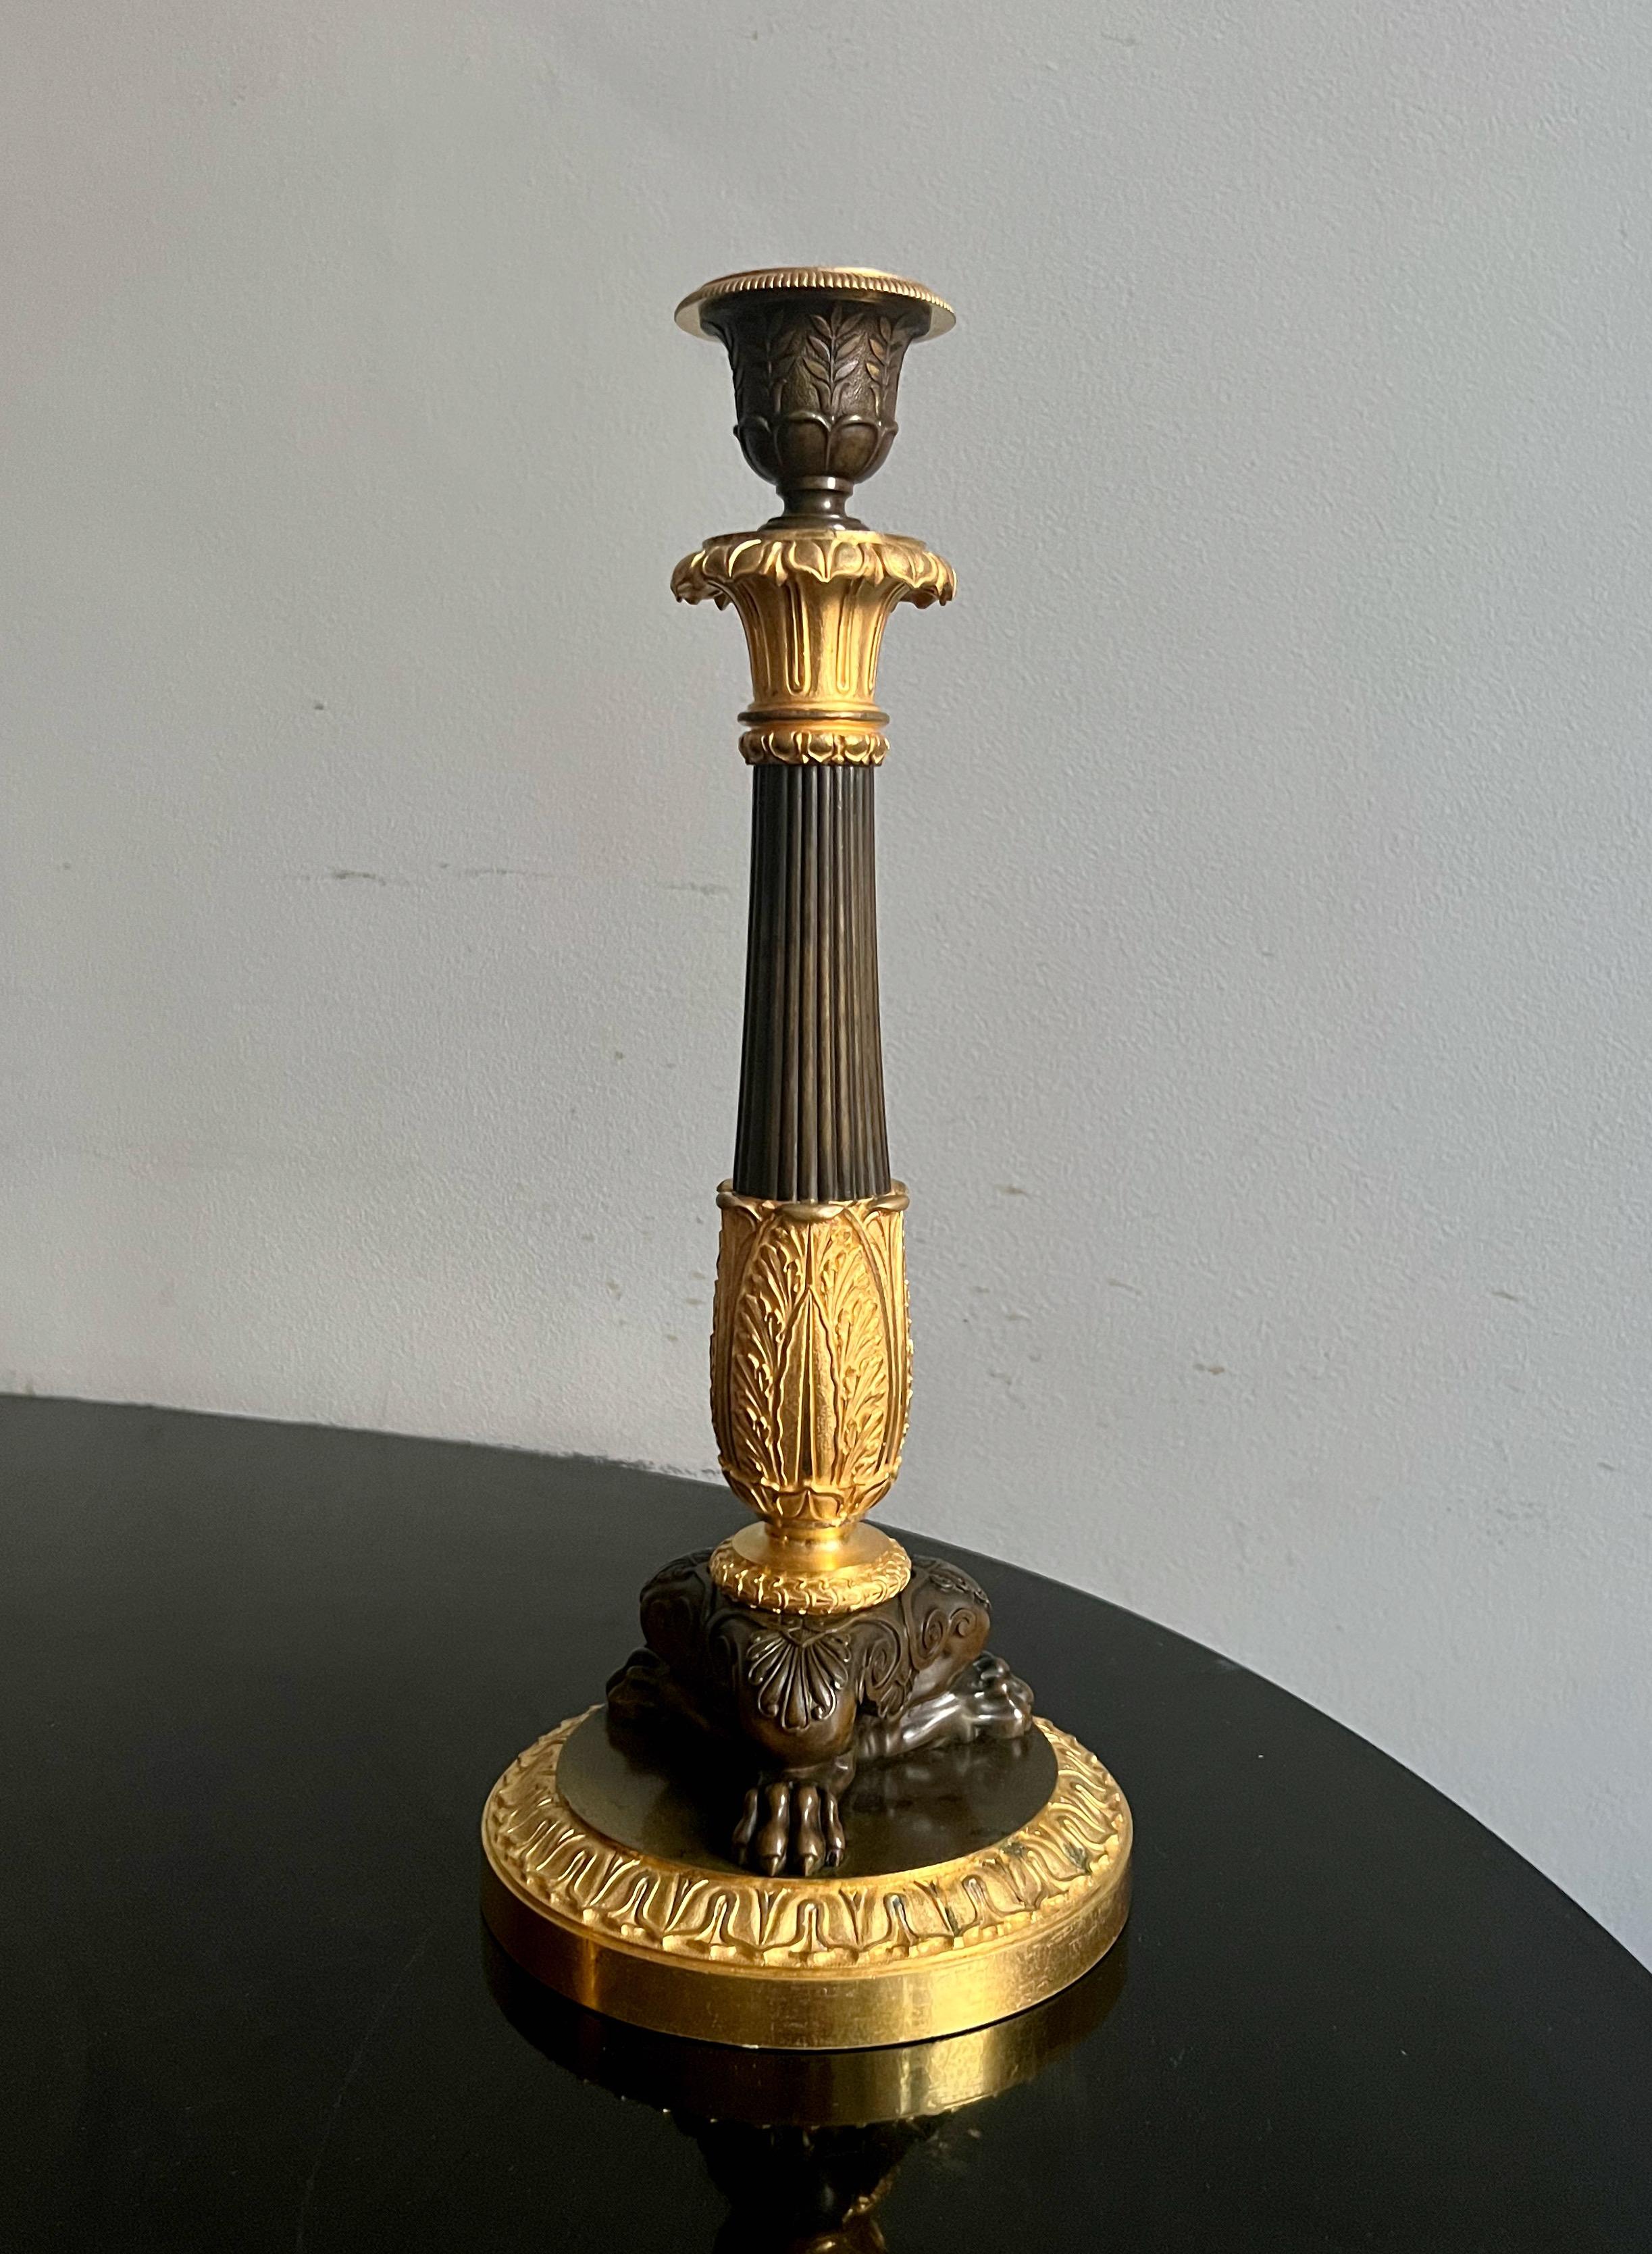 Gilt Pair of Royal Candlesticks from King Louis-Philippe's Chateau De Neuilly